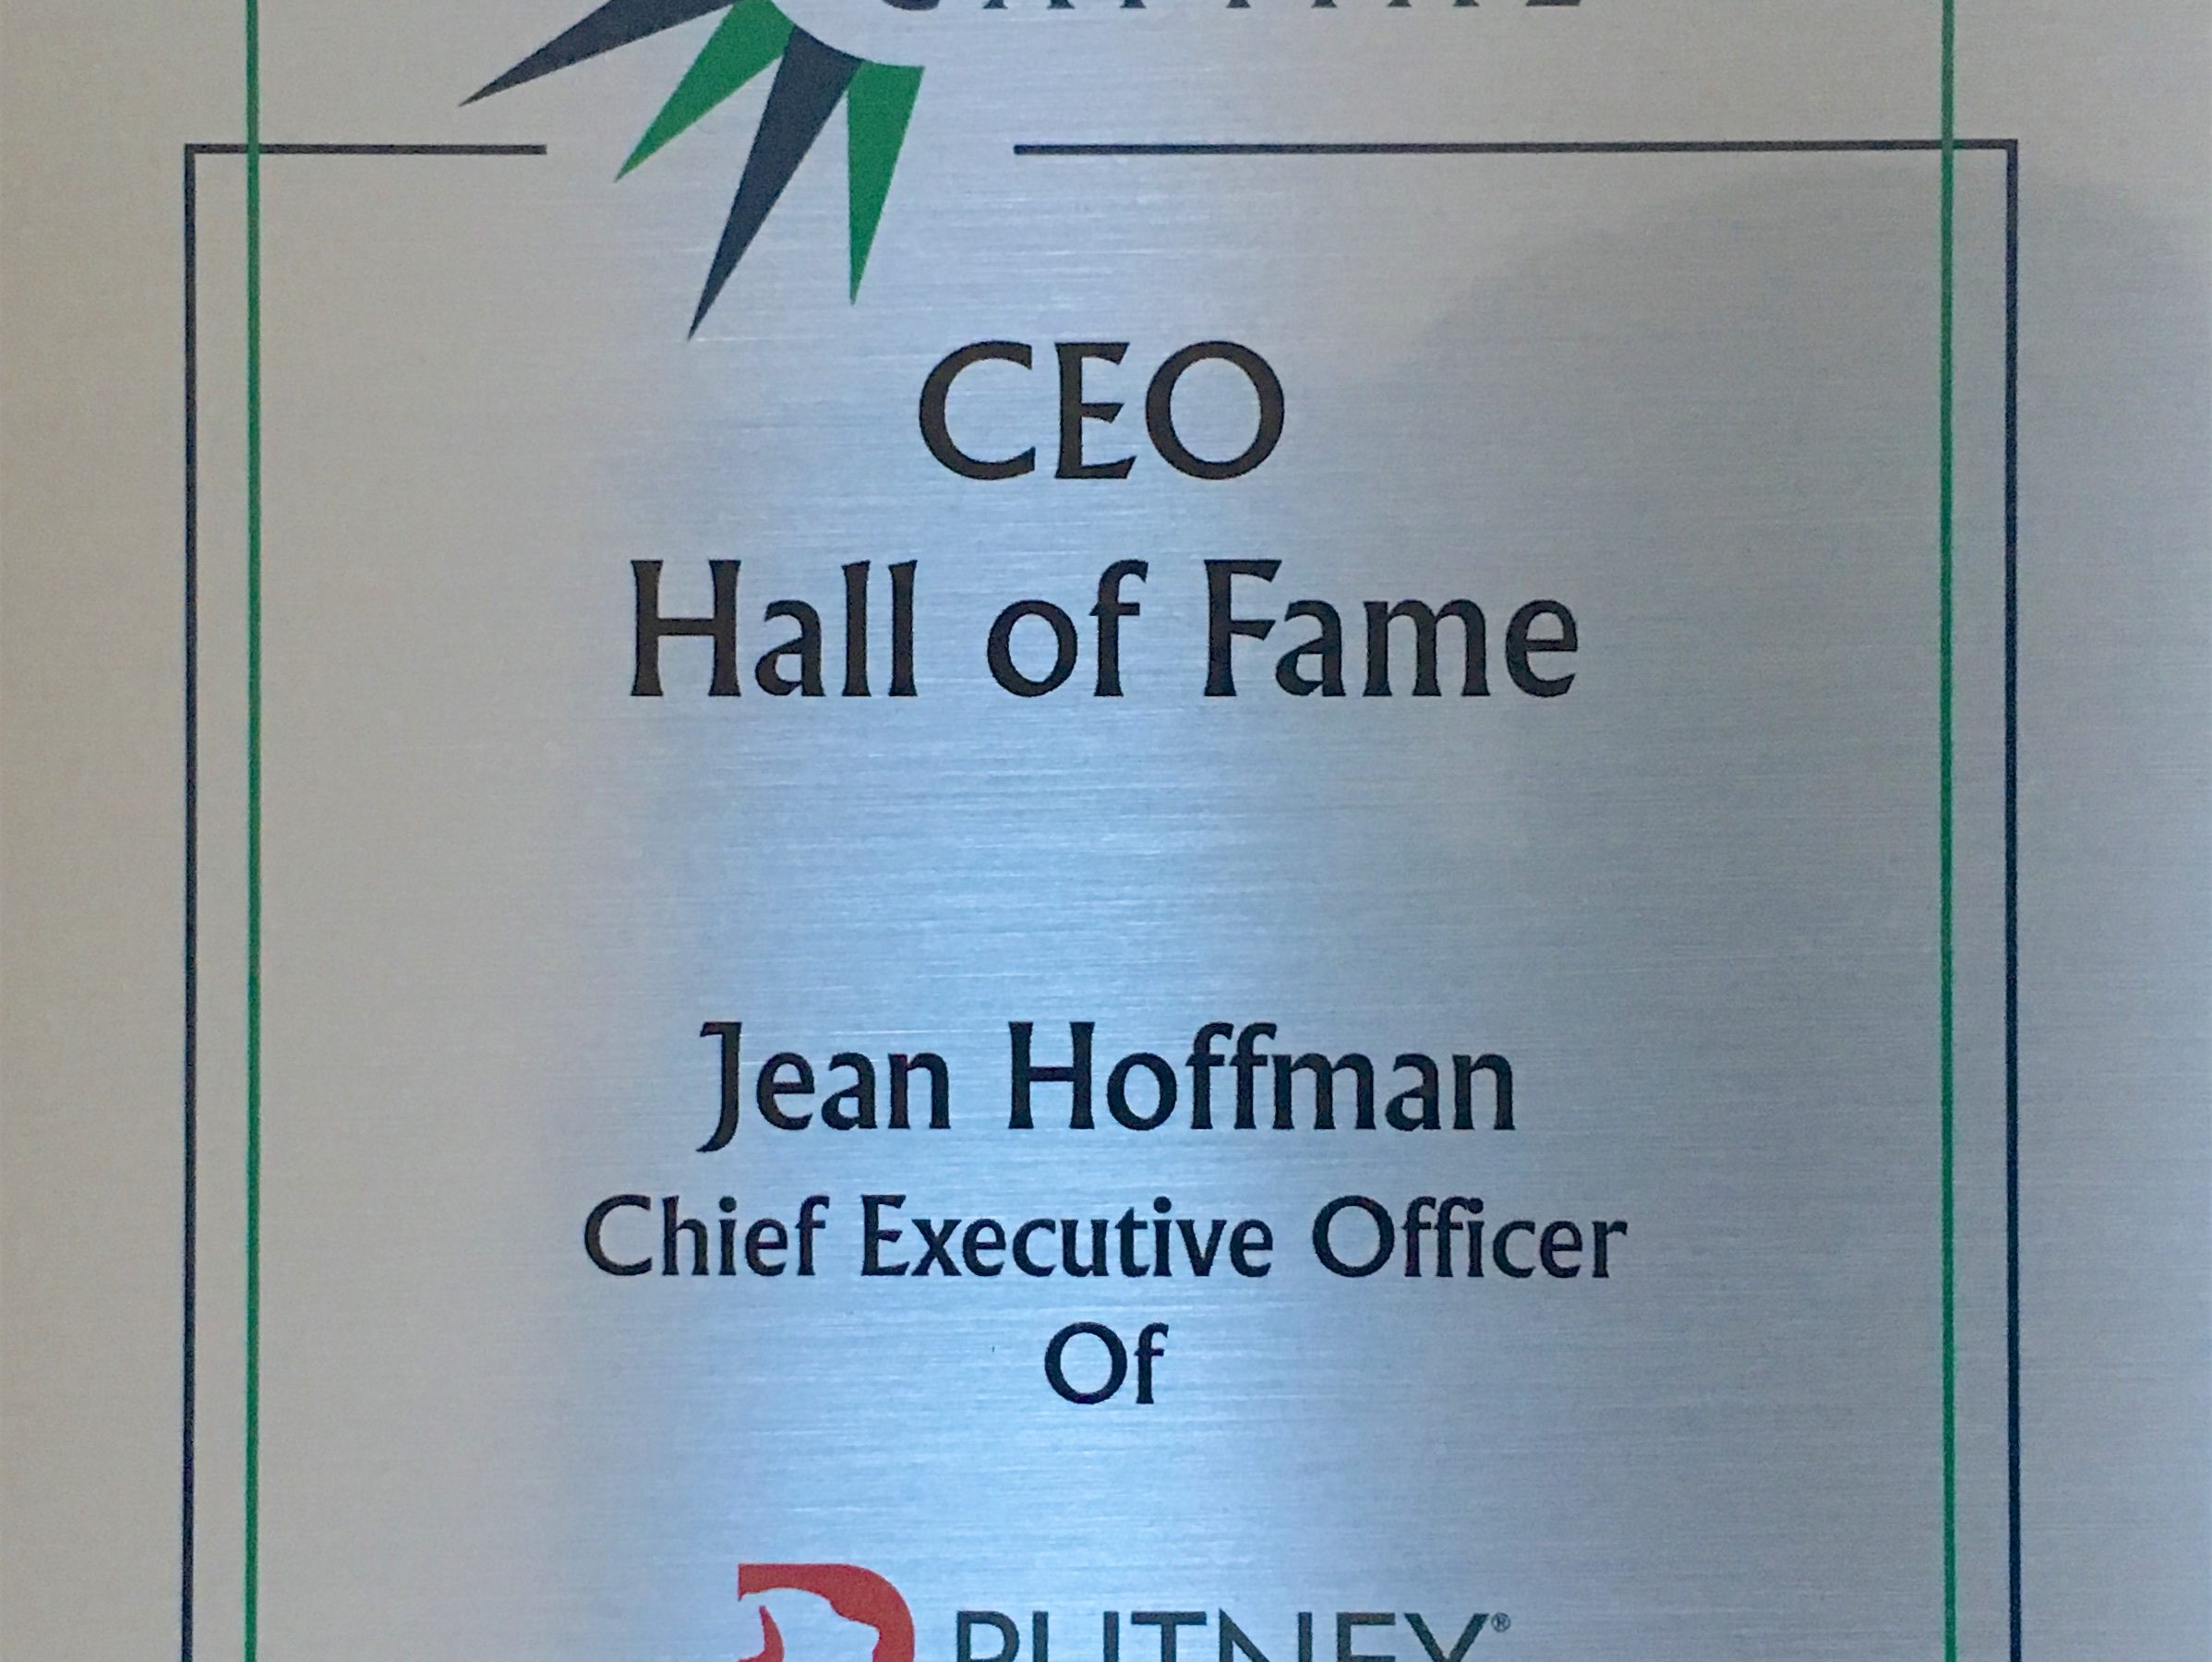 Jean Hoffman named to CEO Hall of Fame